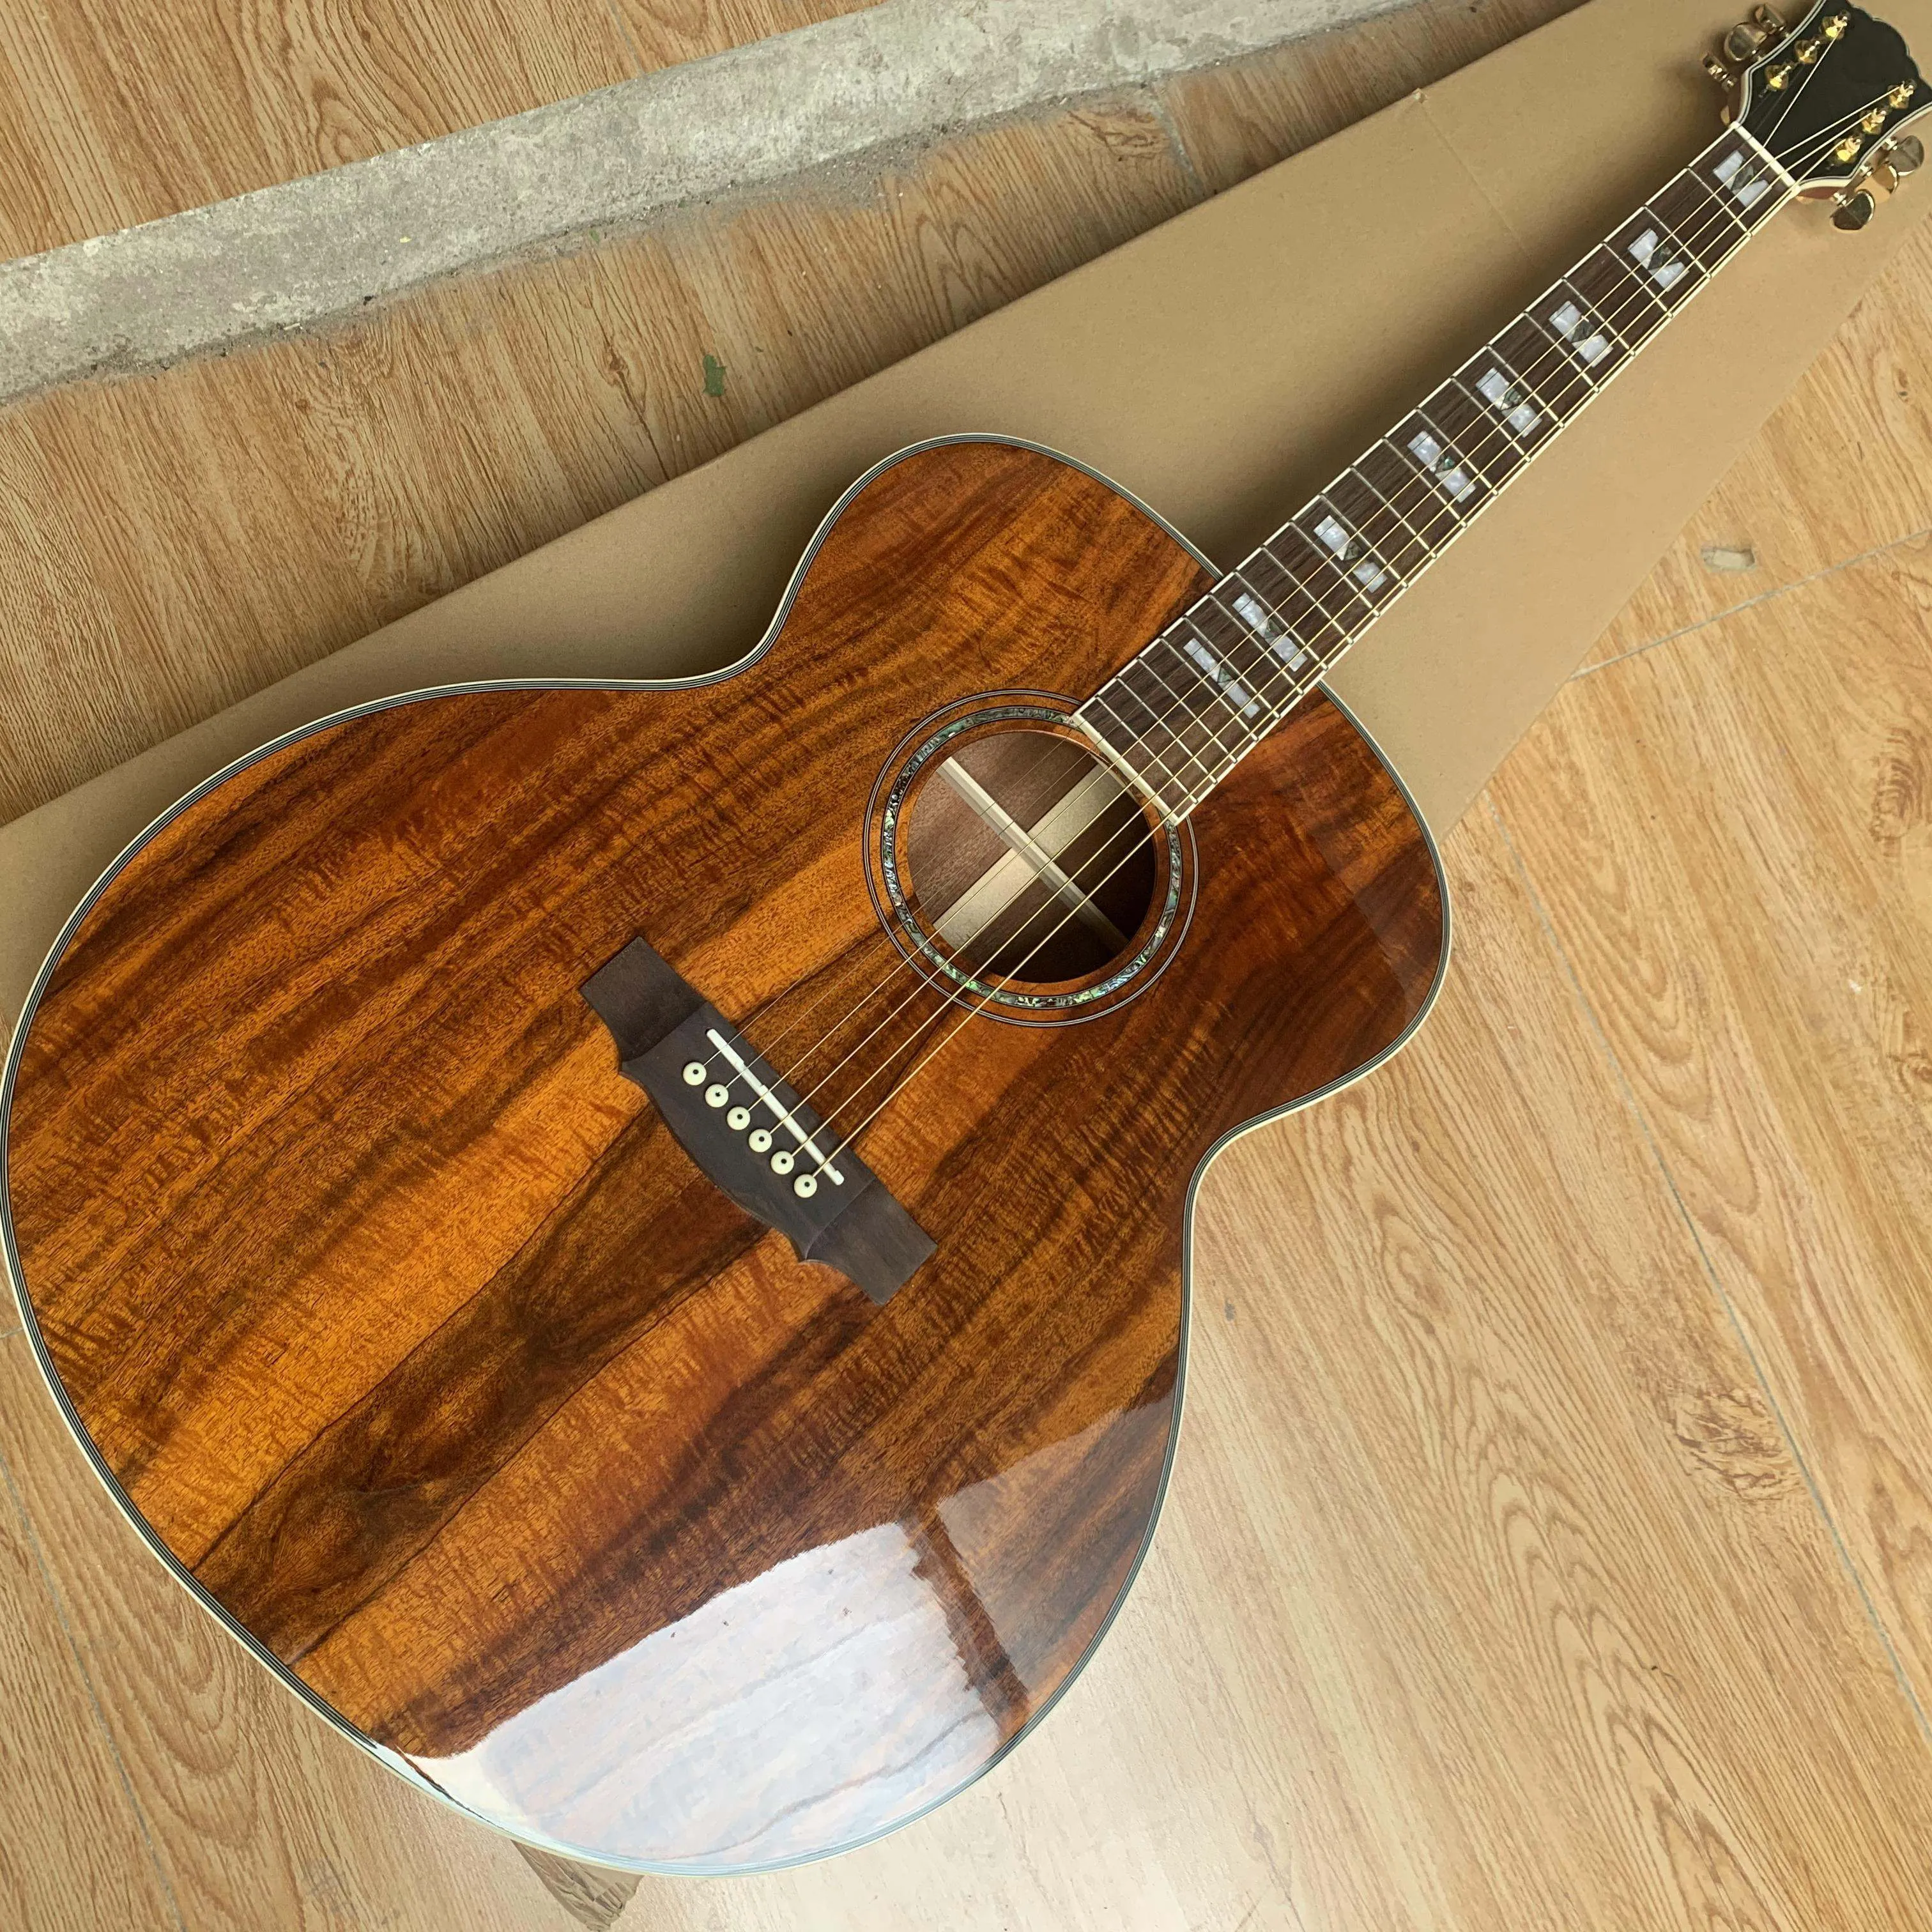 Acoustic Guitar 6Strings All KOA Wood Rosewood Fingerboard Support Customization freeshippings